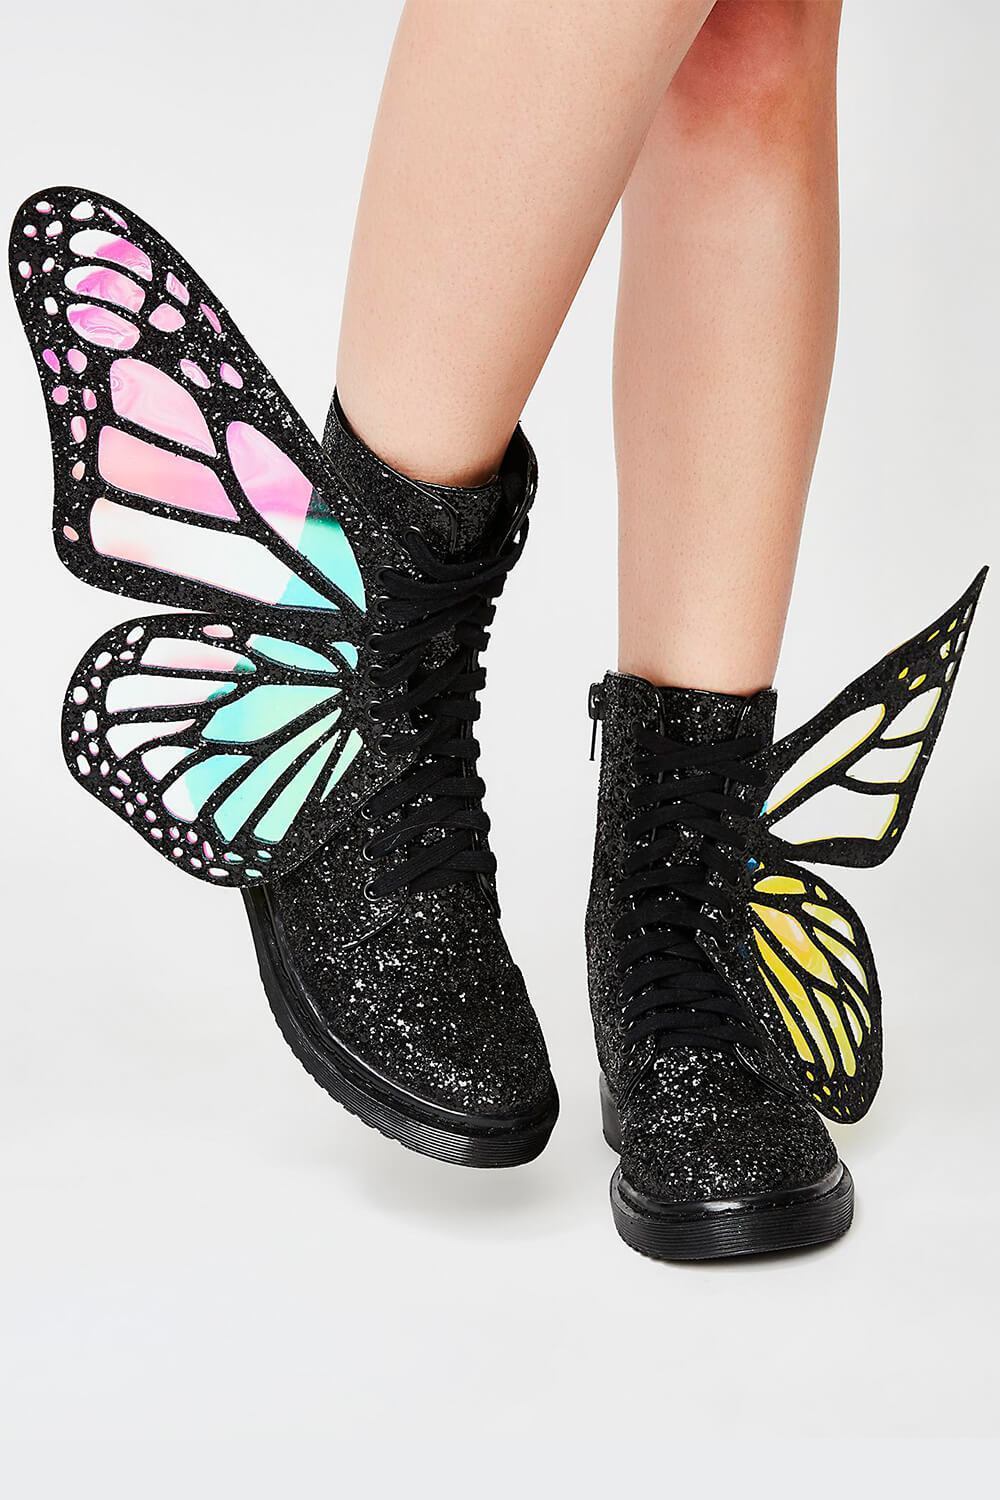 boots with butterfly wings